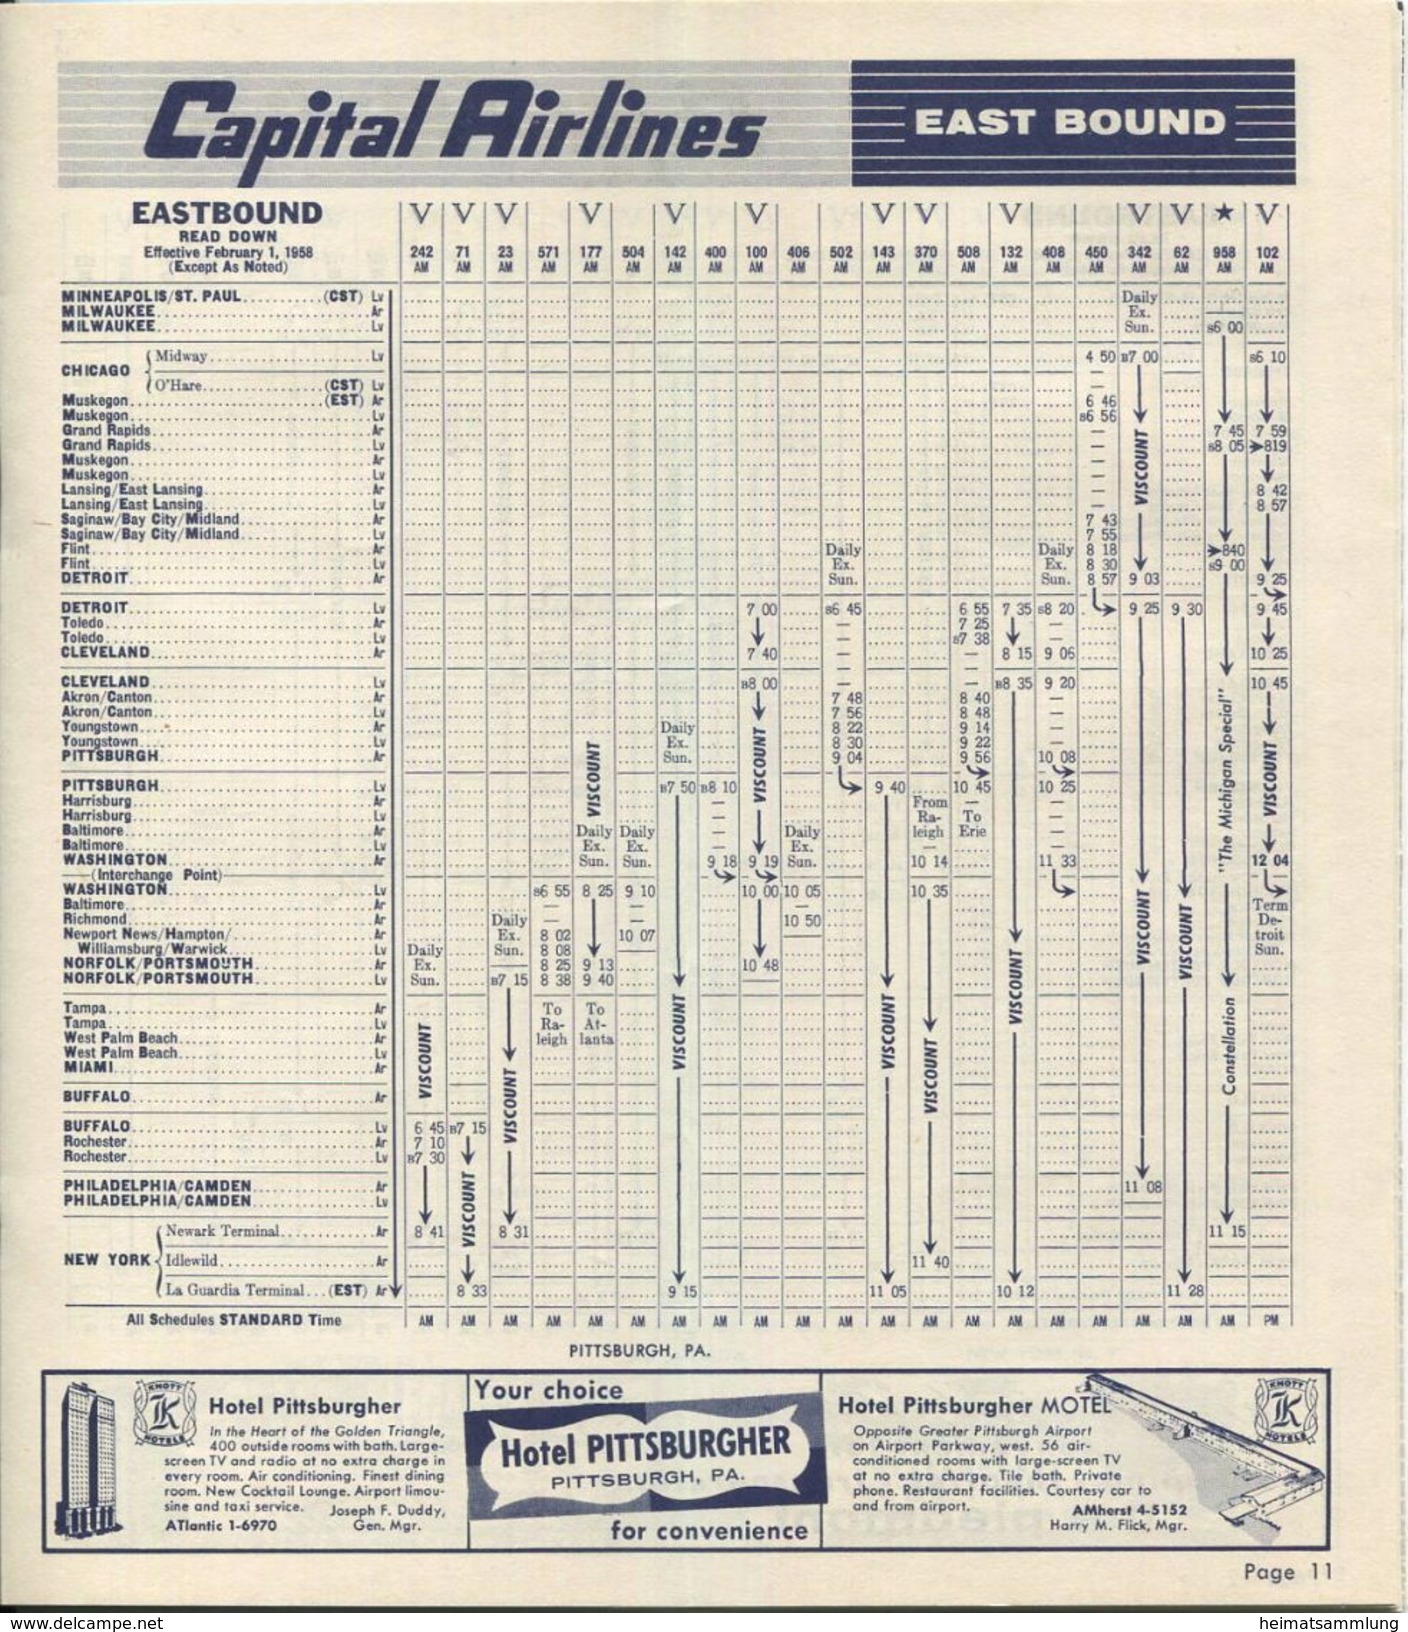 Capital Airlines - Fahrplan Time Table - 28 Seiten 1958 - World